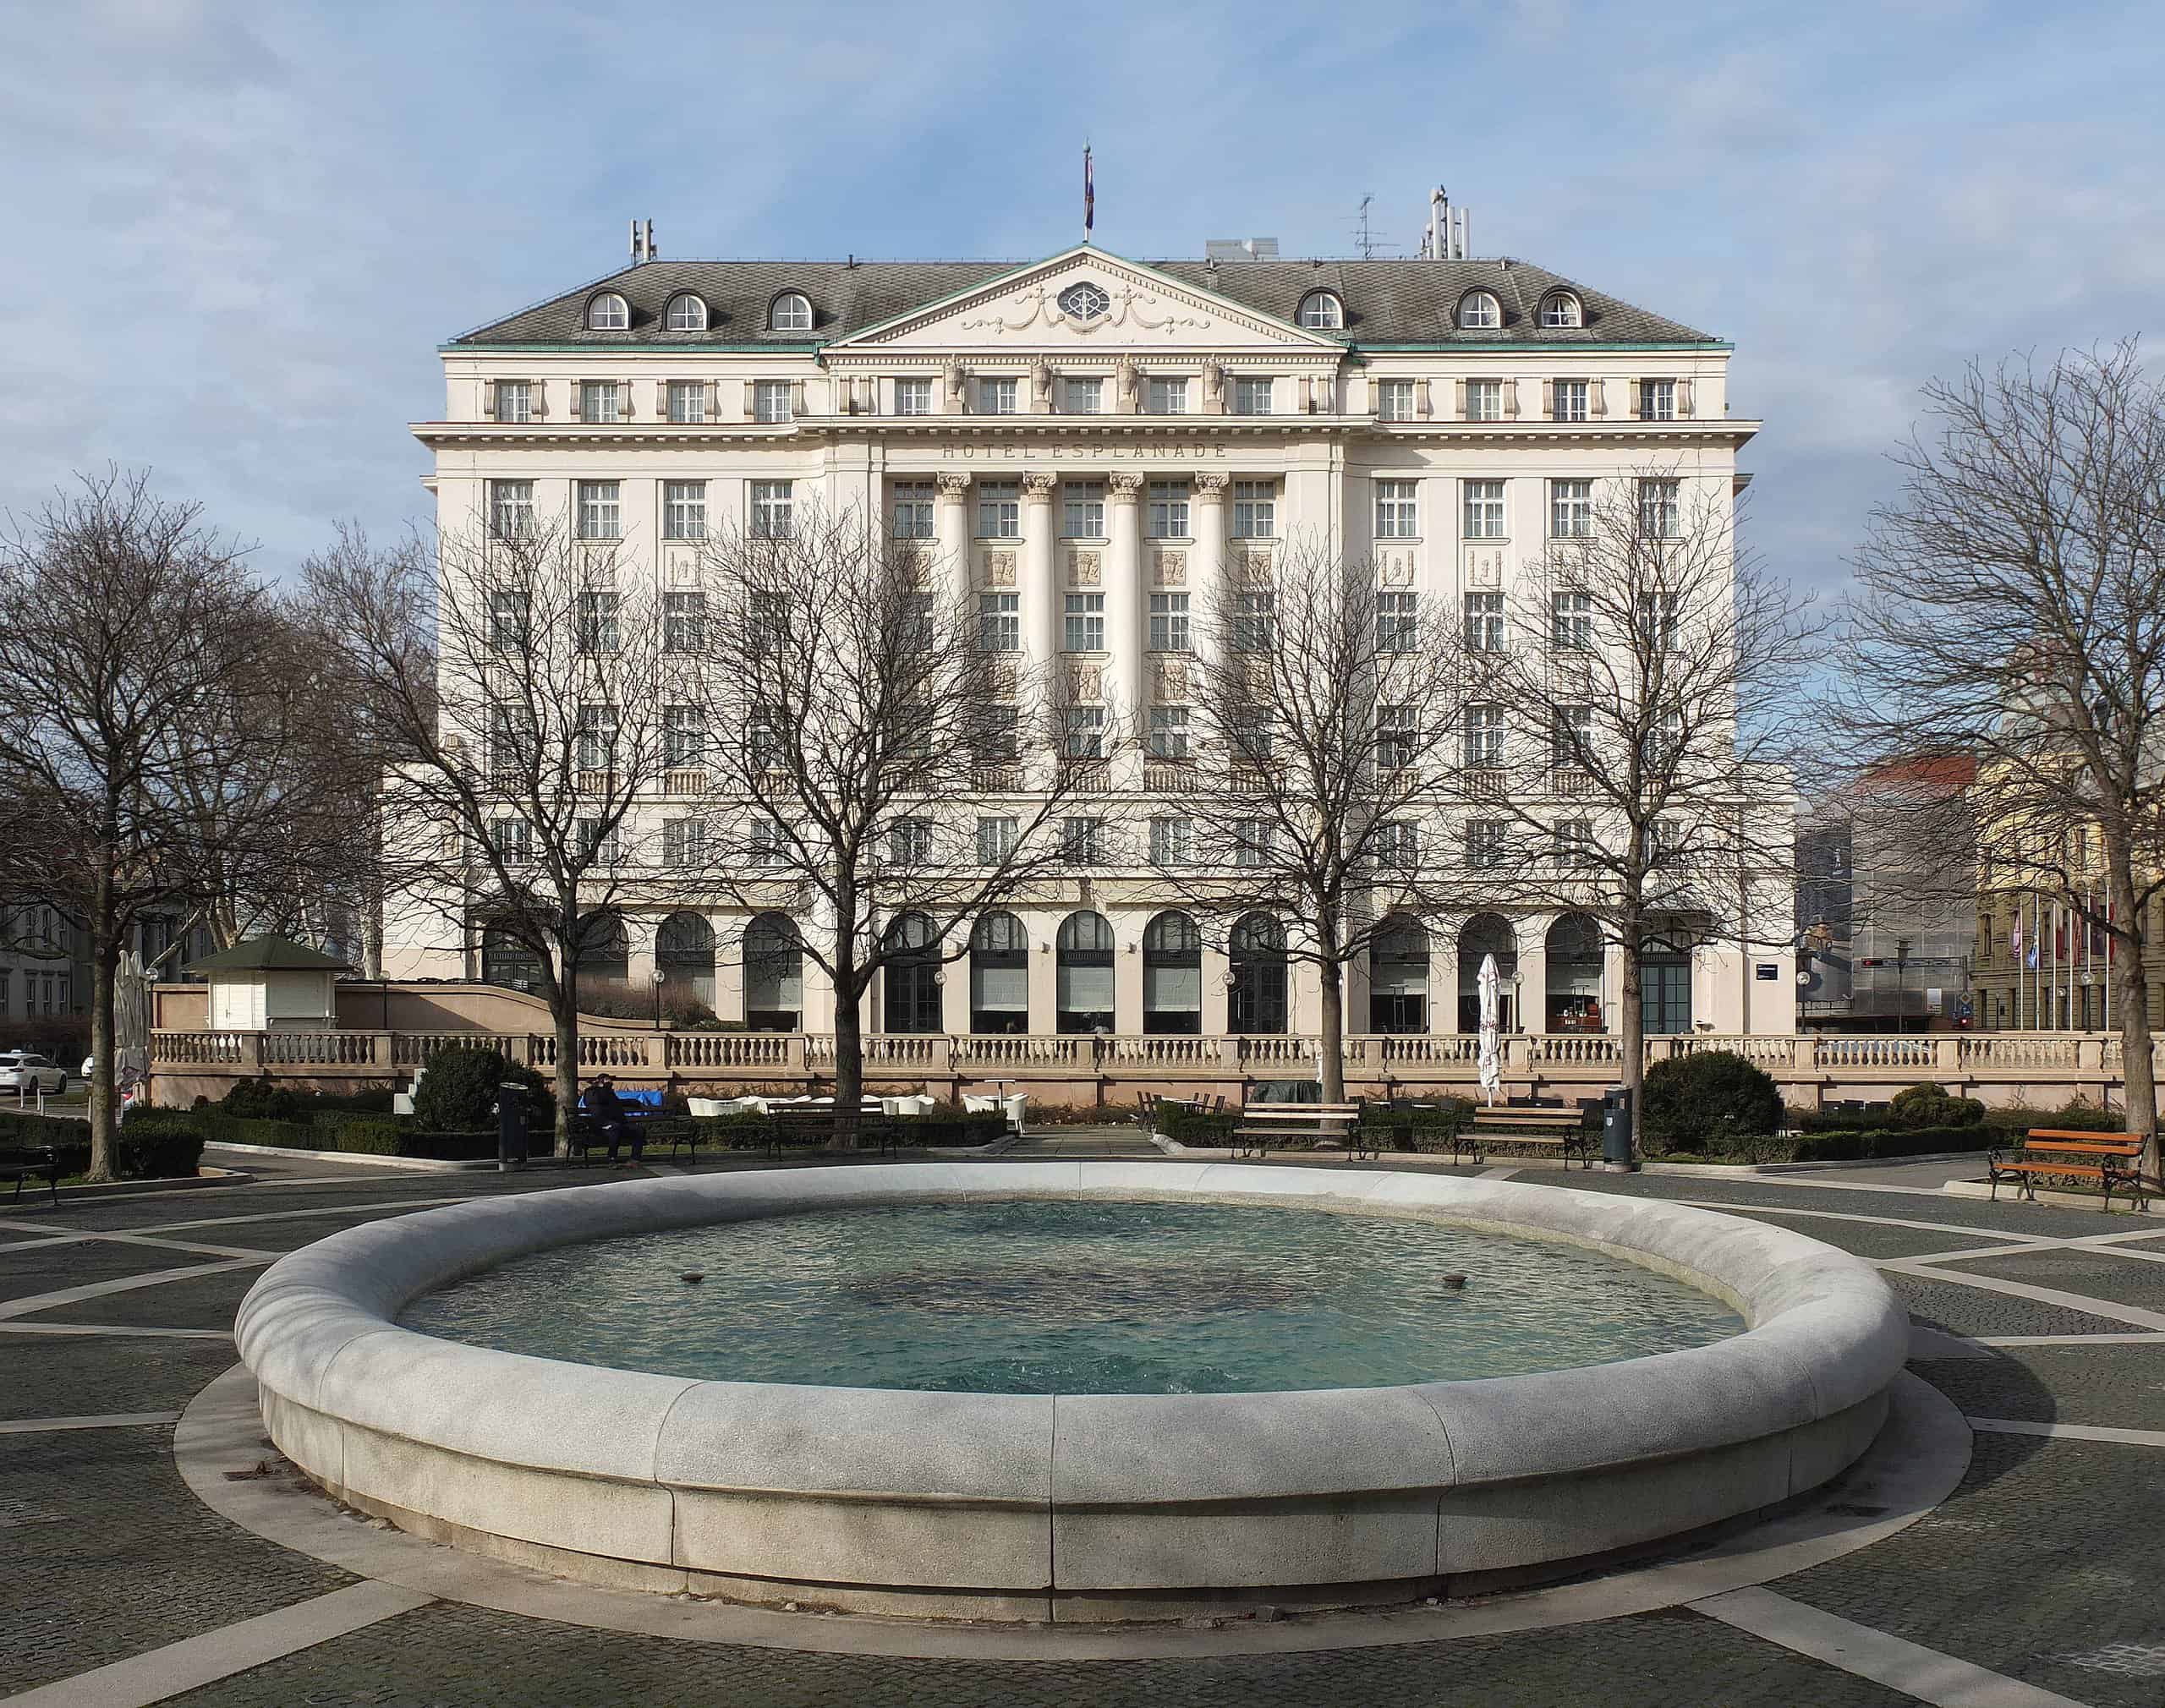 <ul> <li><strong>Sample Cost:</strong> $1,660 to $1,900 per person (Esplanade Zagreb Hotel)</li> </ul> <p>The opposite of Hotel Jagerhorn in Zagreb for those not worried about a budget is the Esplanade Zagreb Hotel. According to TripAdvisor, this is the premium hotel in the area with 208 rooms, including marble bedrooms, bathrooms, and extra amenities. The hotel is classified as "Luxury", but it's also family-friendly and allows pets.</p> <p>To be fair, the hotel looks like something right out of a <em>James Bond</em> movie. Unfortunately, we're too close to the summer months to accommodate our entire 6/23 – 6/30 travel period. However, on average, it looks like the average nightly stay in June and July is going for around 230 Euros or $250 a night. Given that, you could expect to spend around $1,870 for the whole trip. For holiday travelers looking to stay from 12/23 to 12/30, you're looking at around $1,661 for the entirety of your stay.</p> <p>Agree with this? Hit the Thumbs Up button above. Disagree? Let us know in the comments with what you'd change.</p>